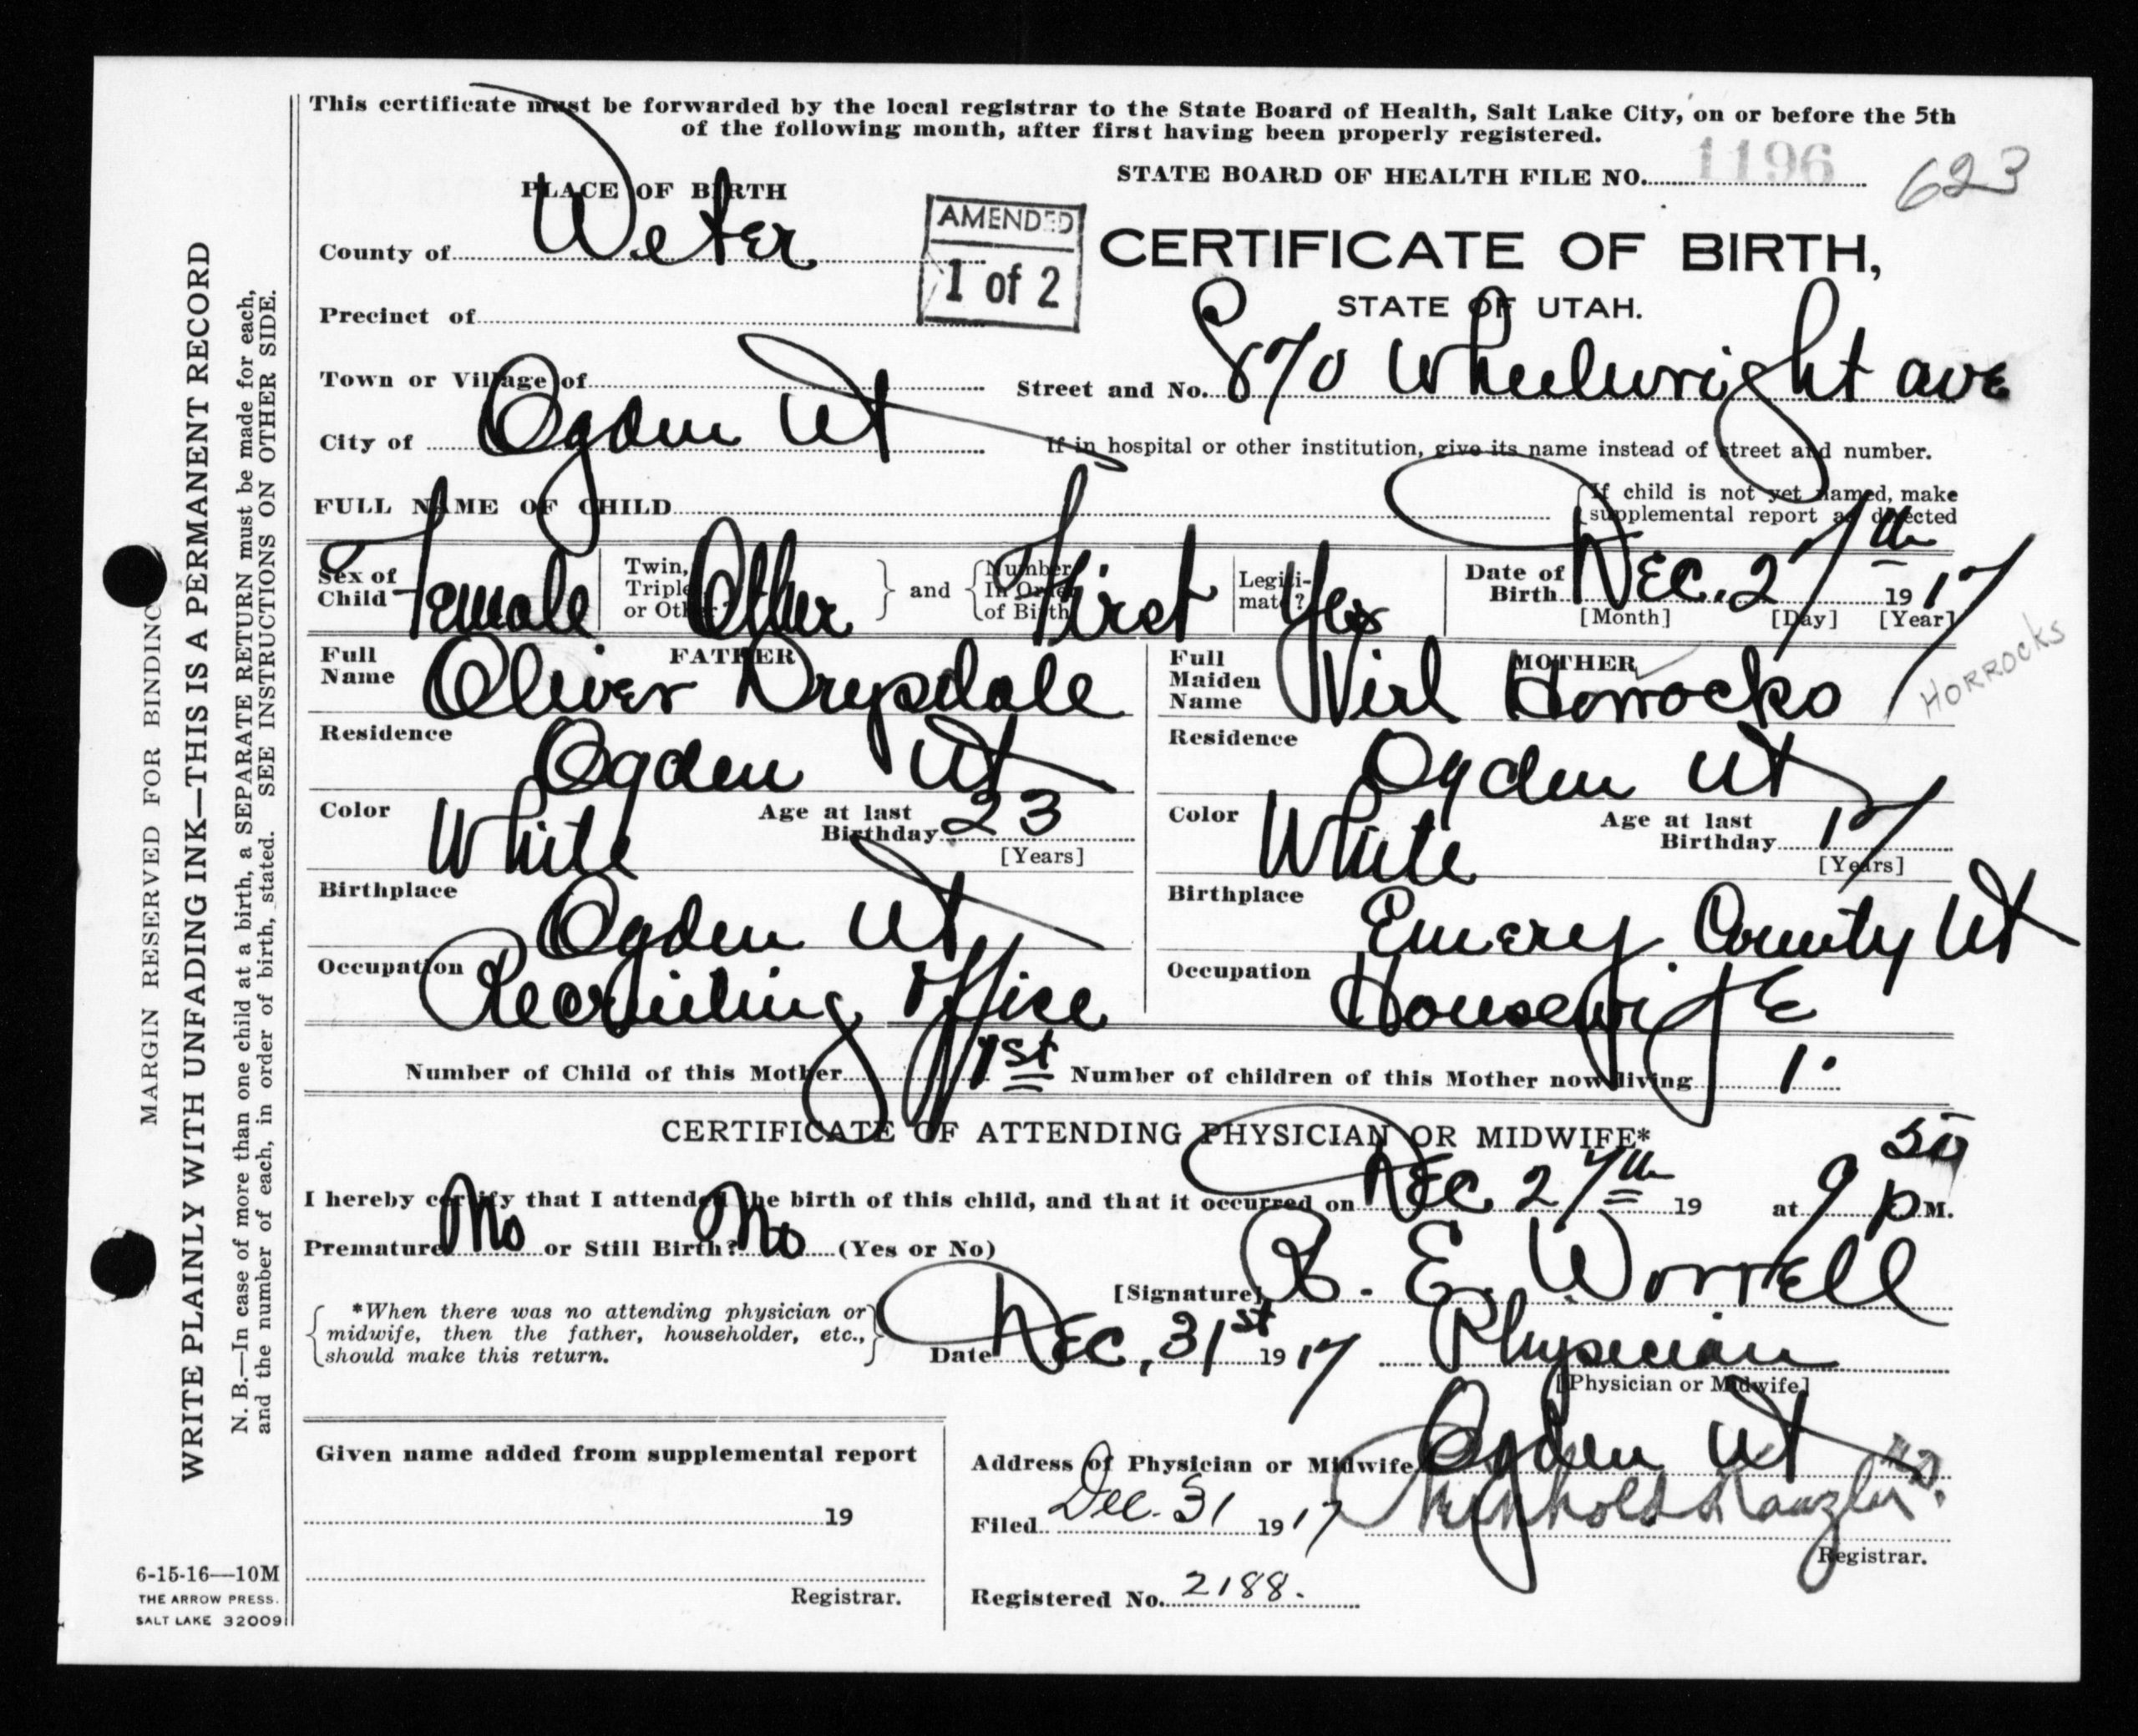 Birth certificate from 1917